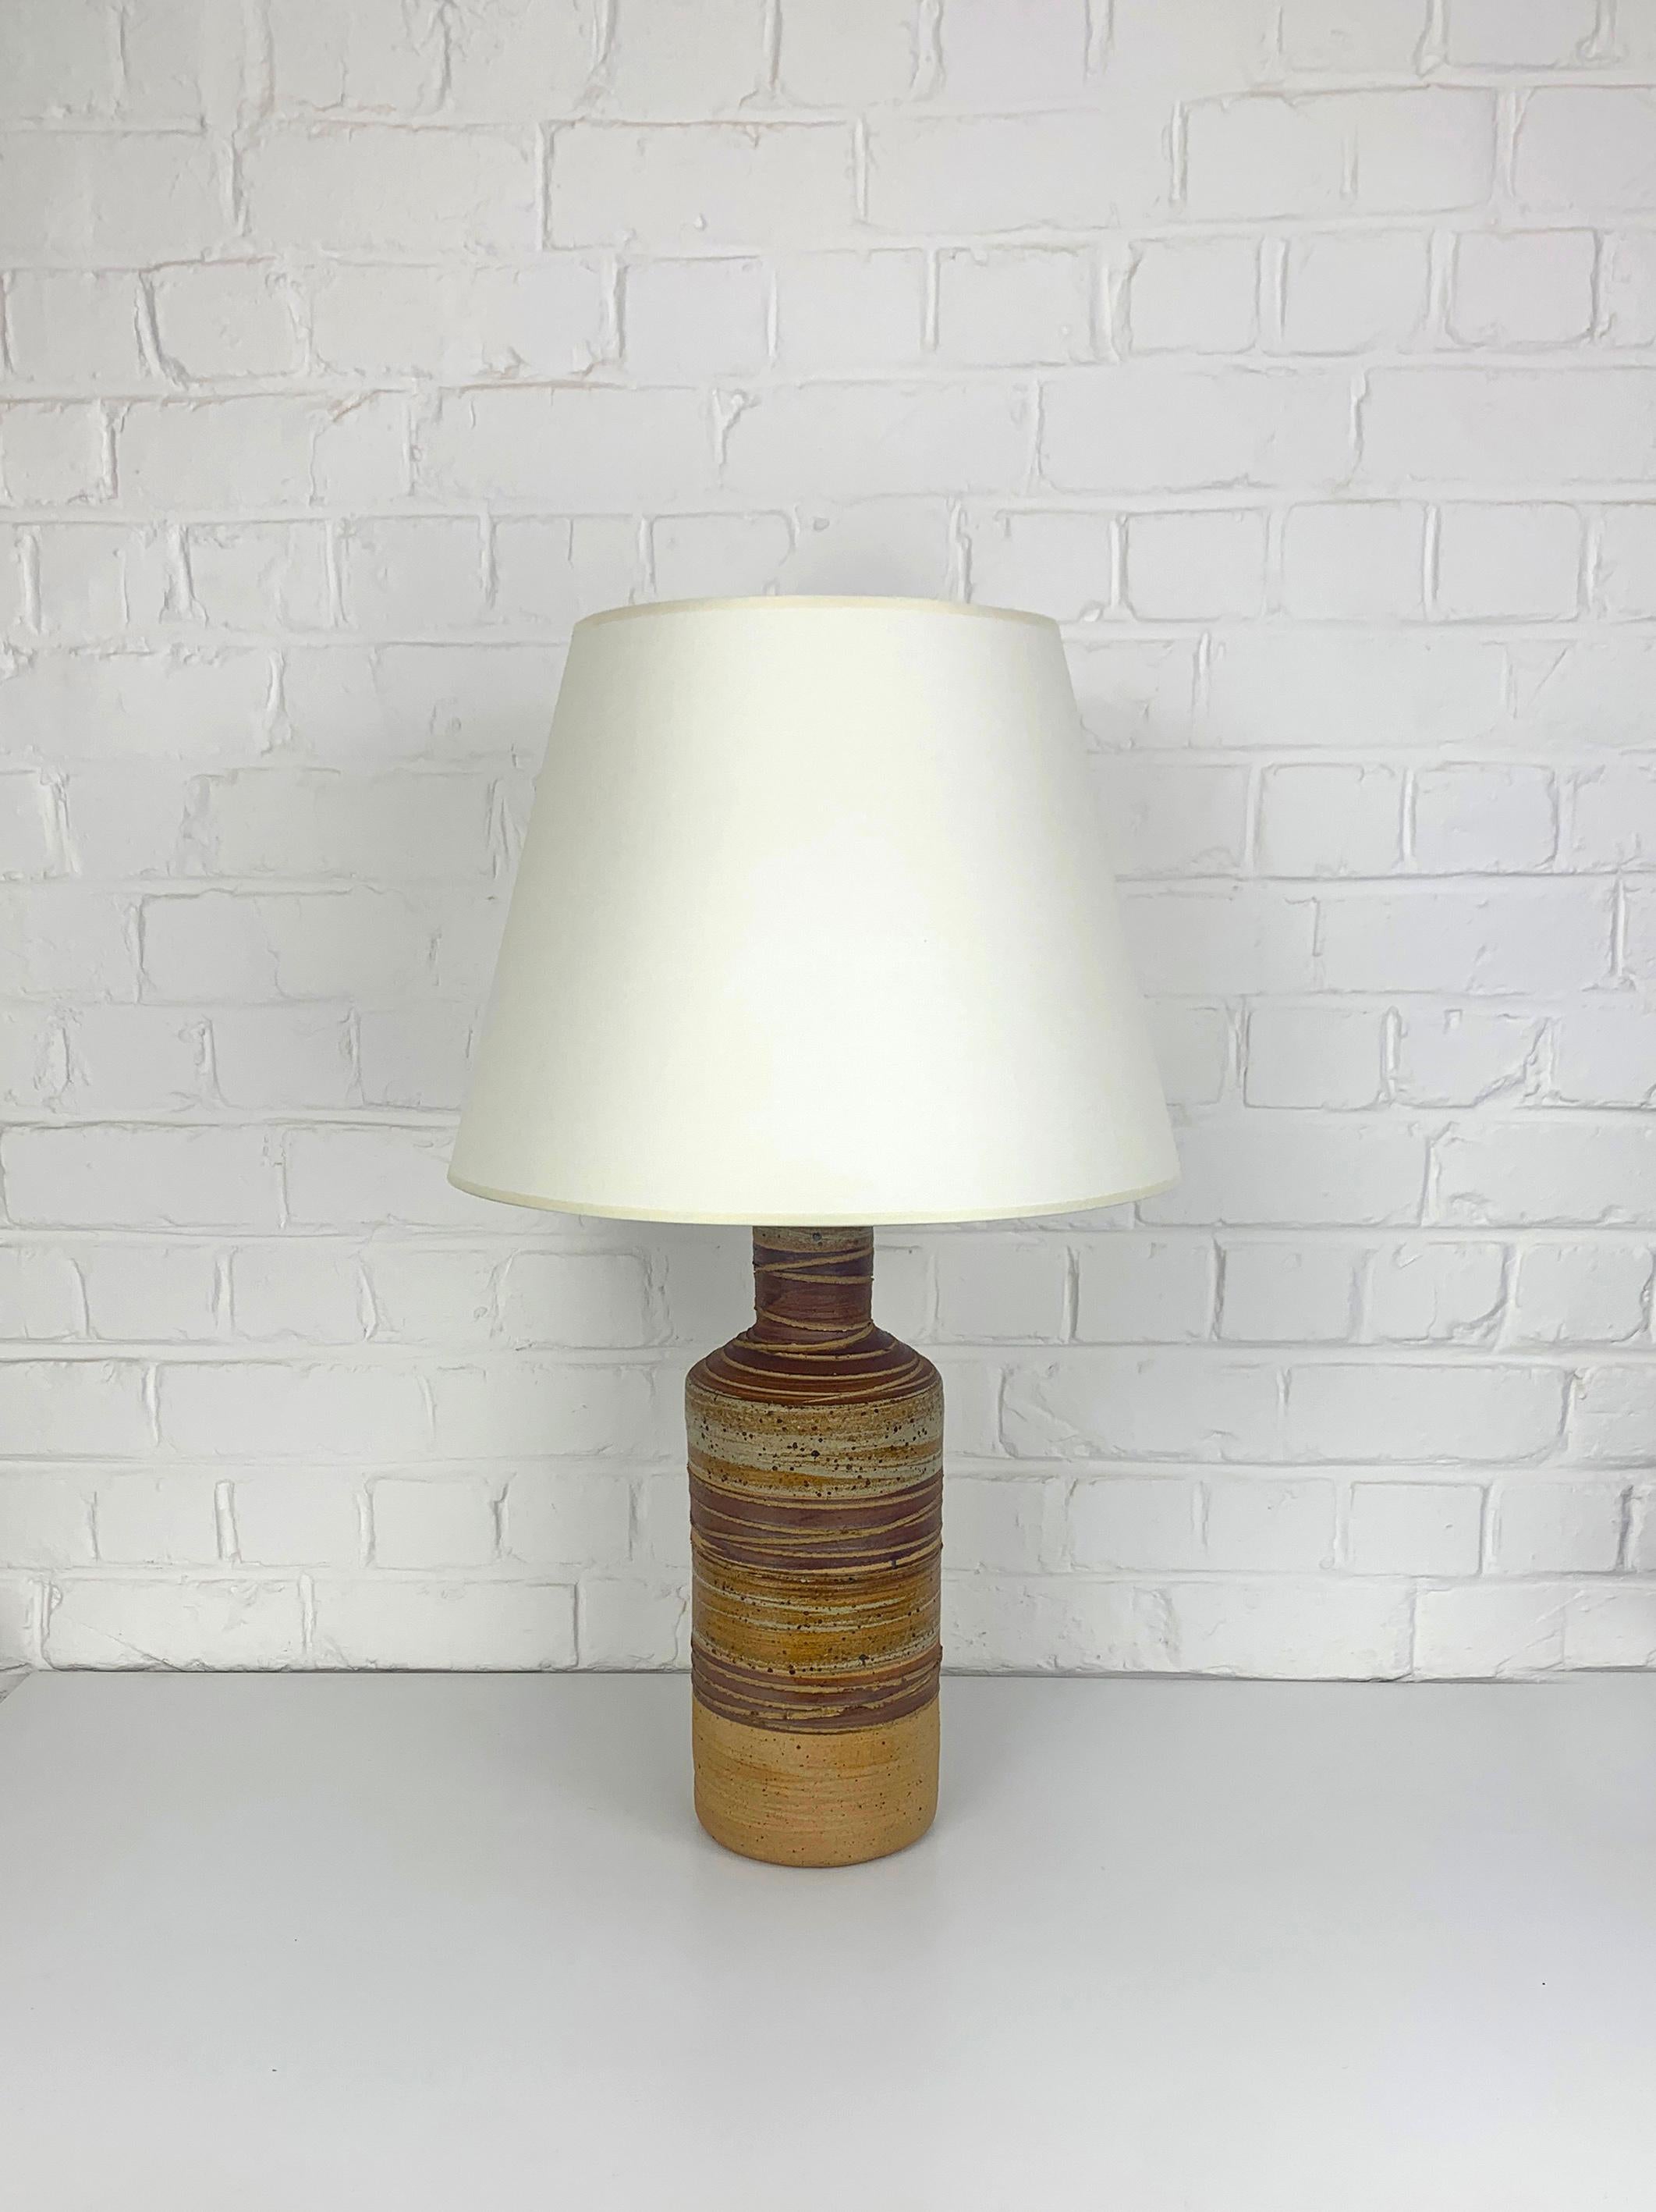 20th Century Tall Ceramic table lamp Tue Poulsen Denmark stoneware natural brown earth colors For Sale